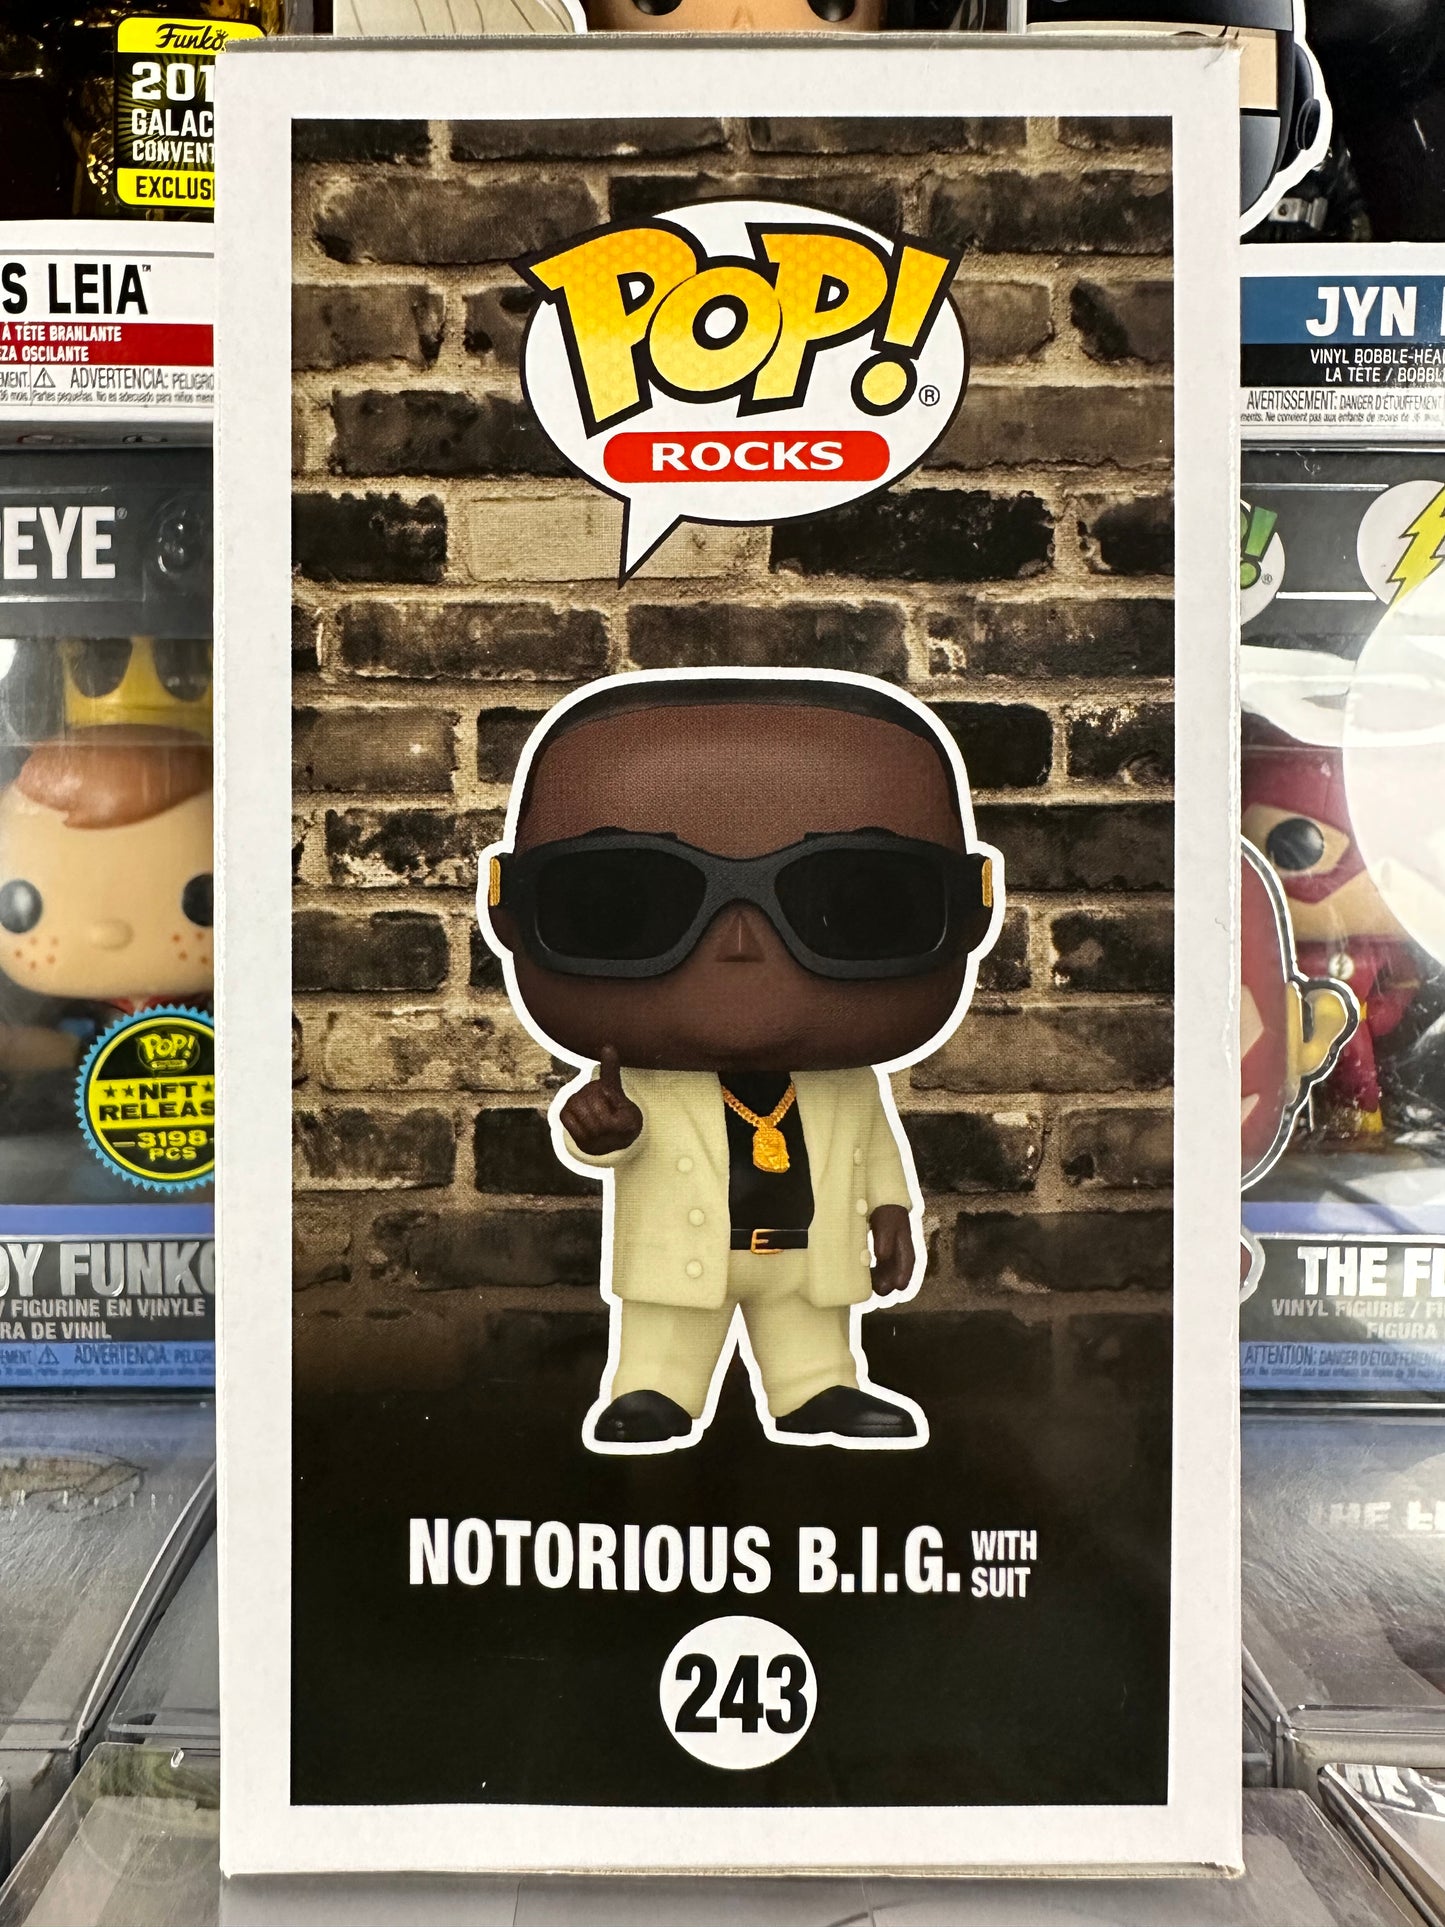 Pop Rocks - The Notorious BIG - Notorious B.I.G. with Suit (243)